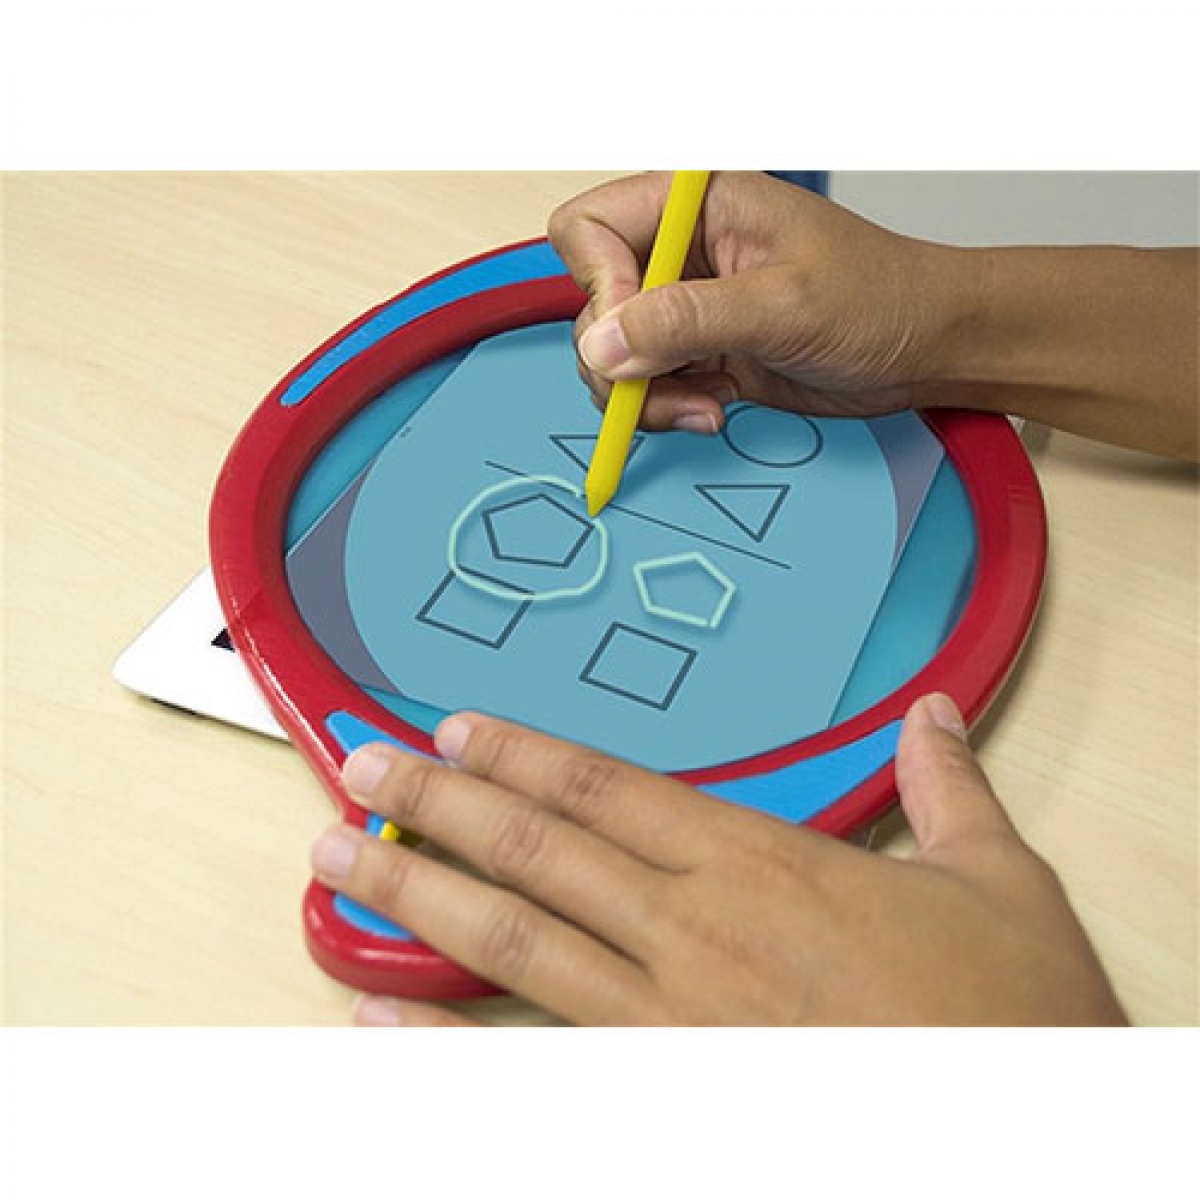 https://www.autism-products.com/wp-content/uploads/Boogie-Board-Play-n-Trace-1200x1200.jpg